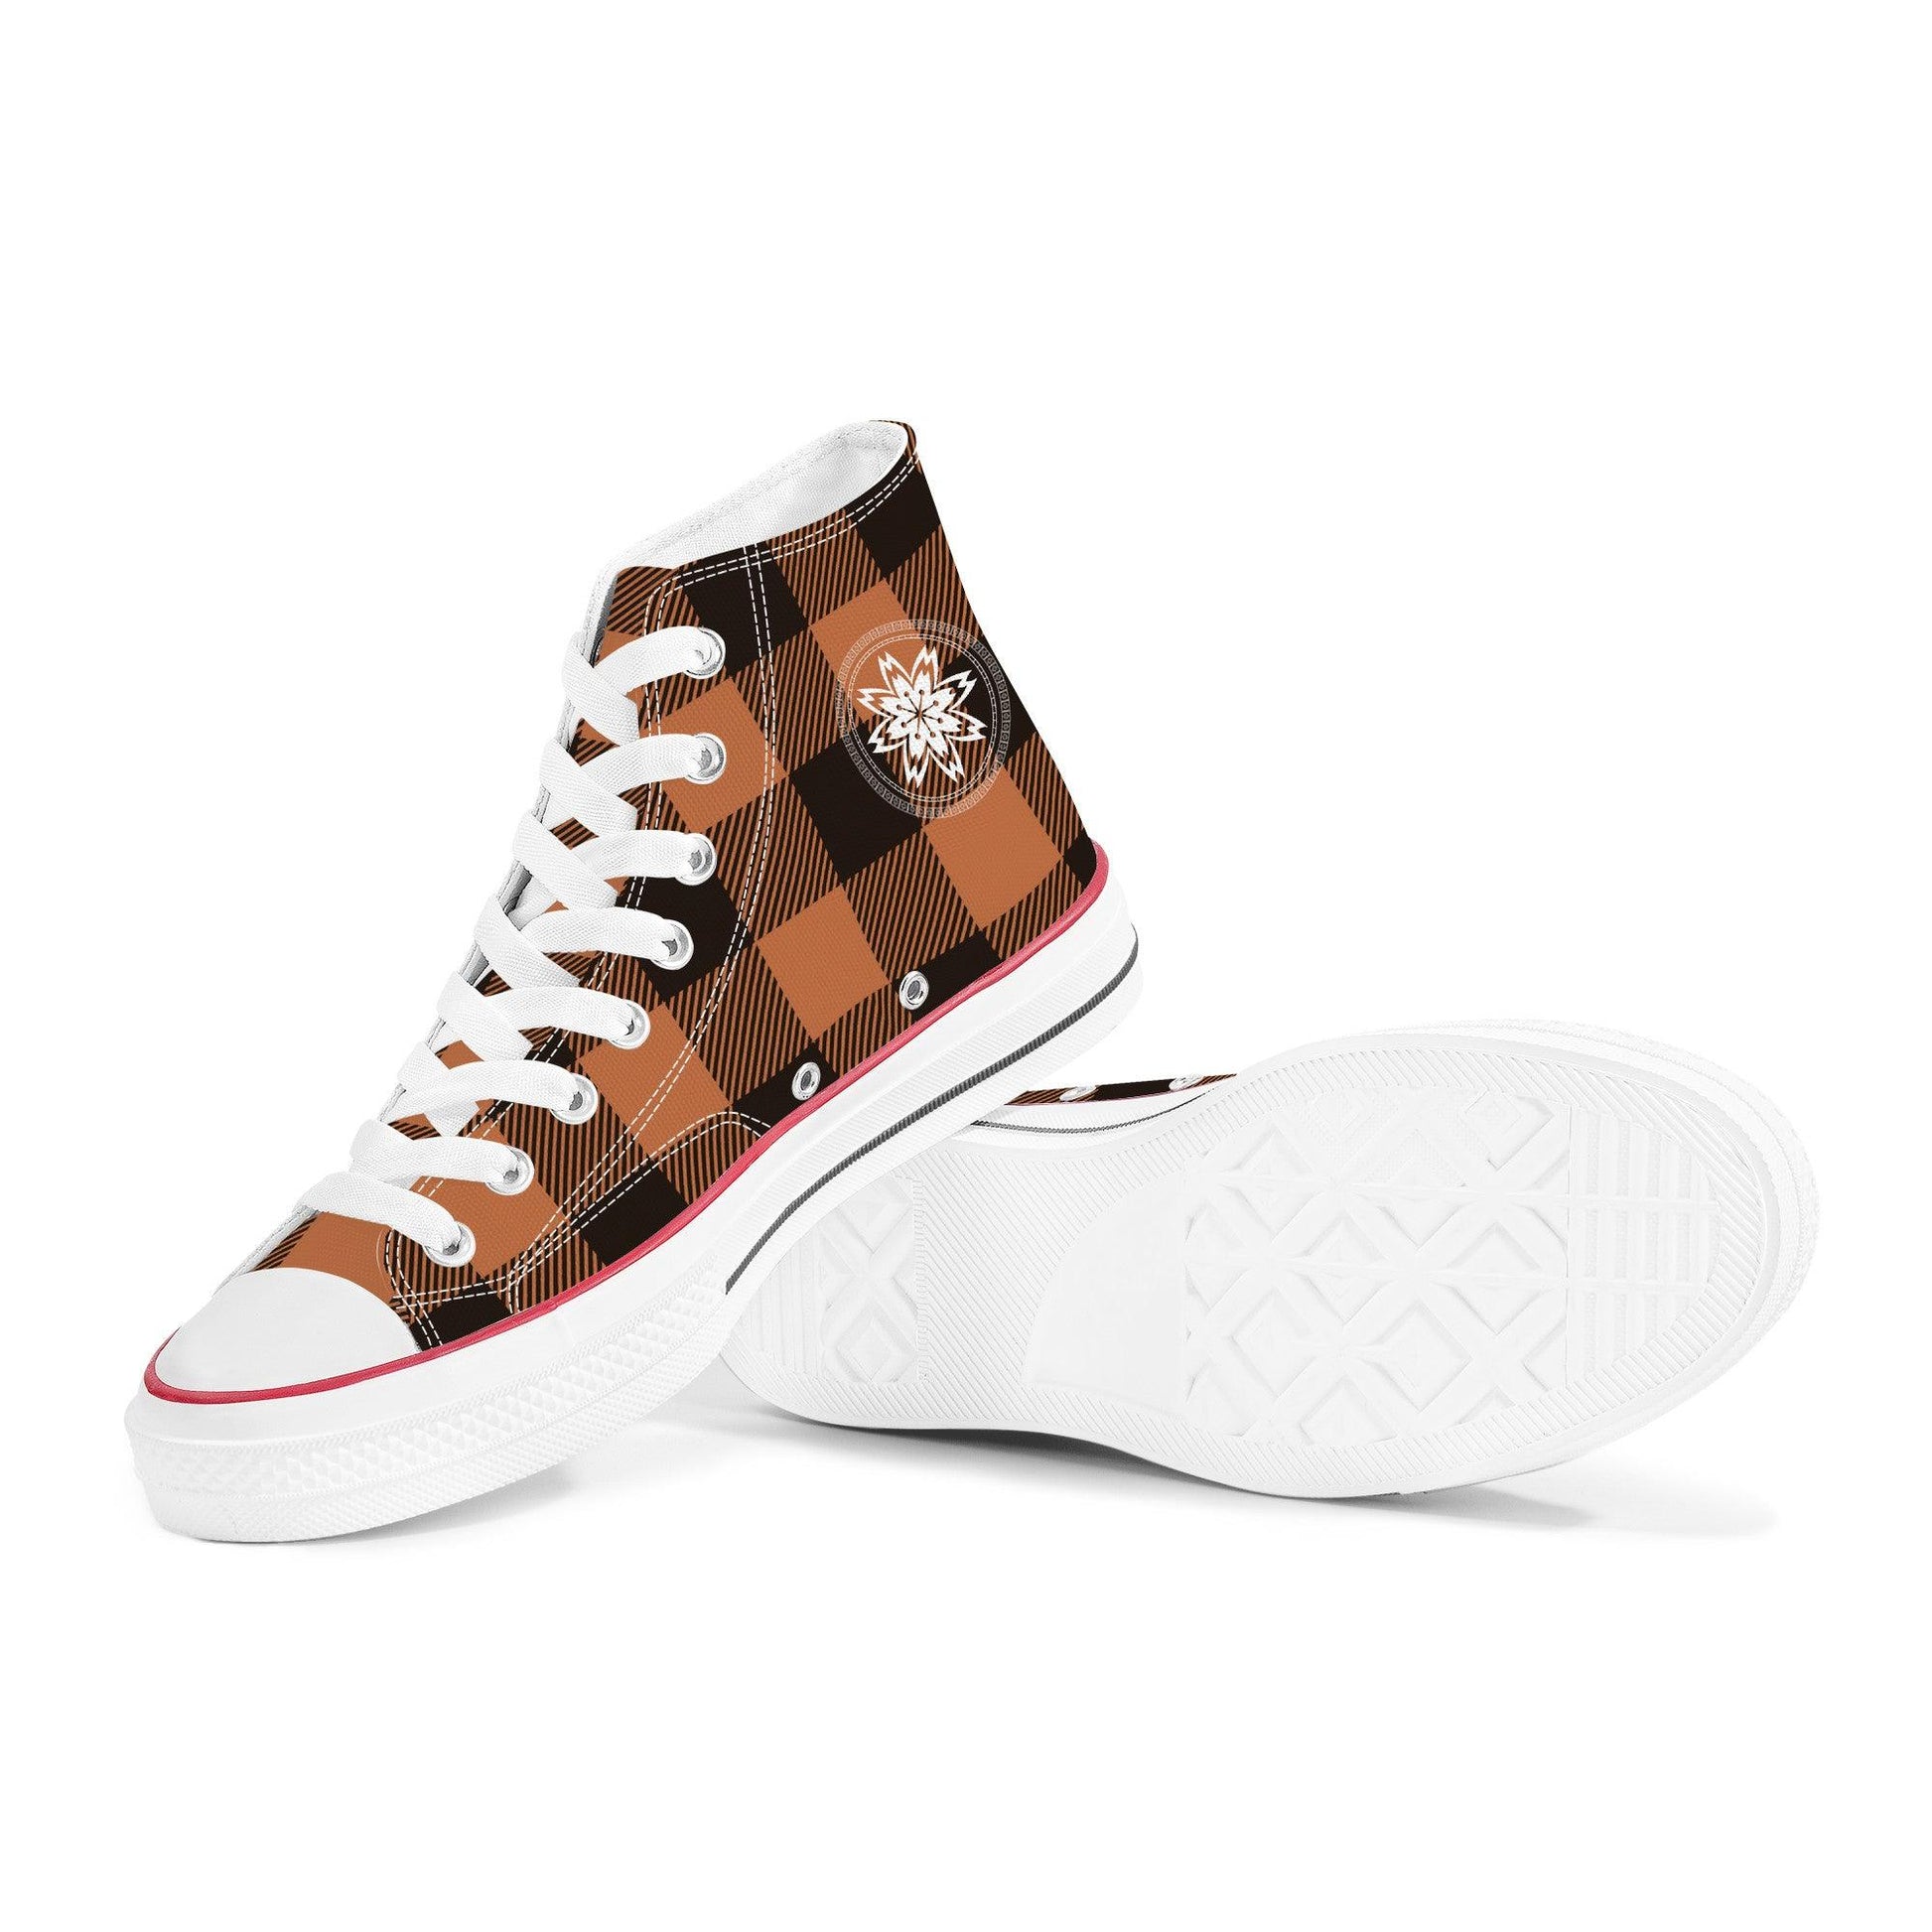 Brown & Black Checkers - High Top Canvas Shoes - Kaito Japan Design 